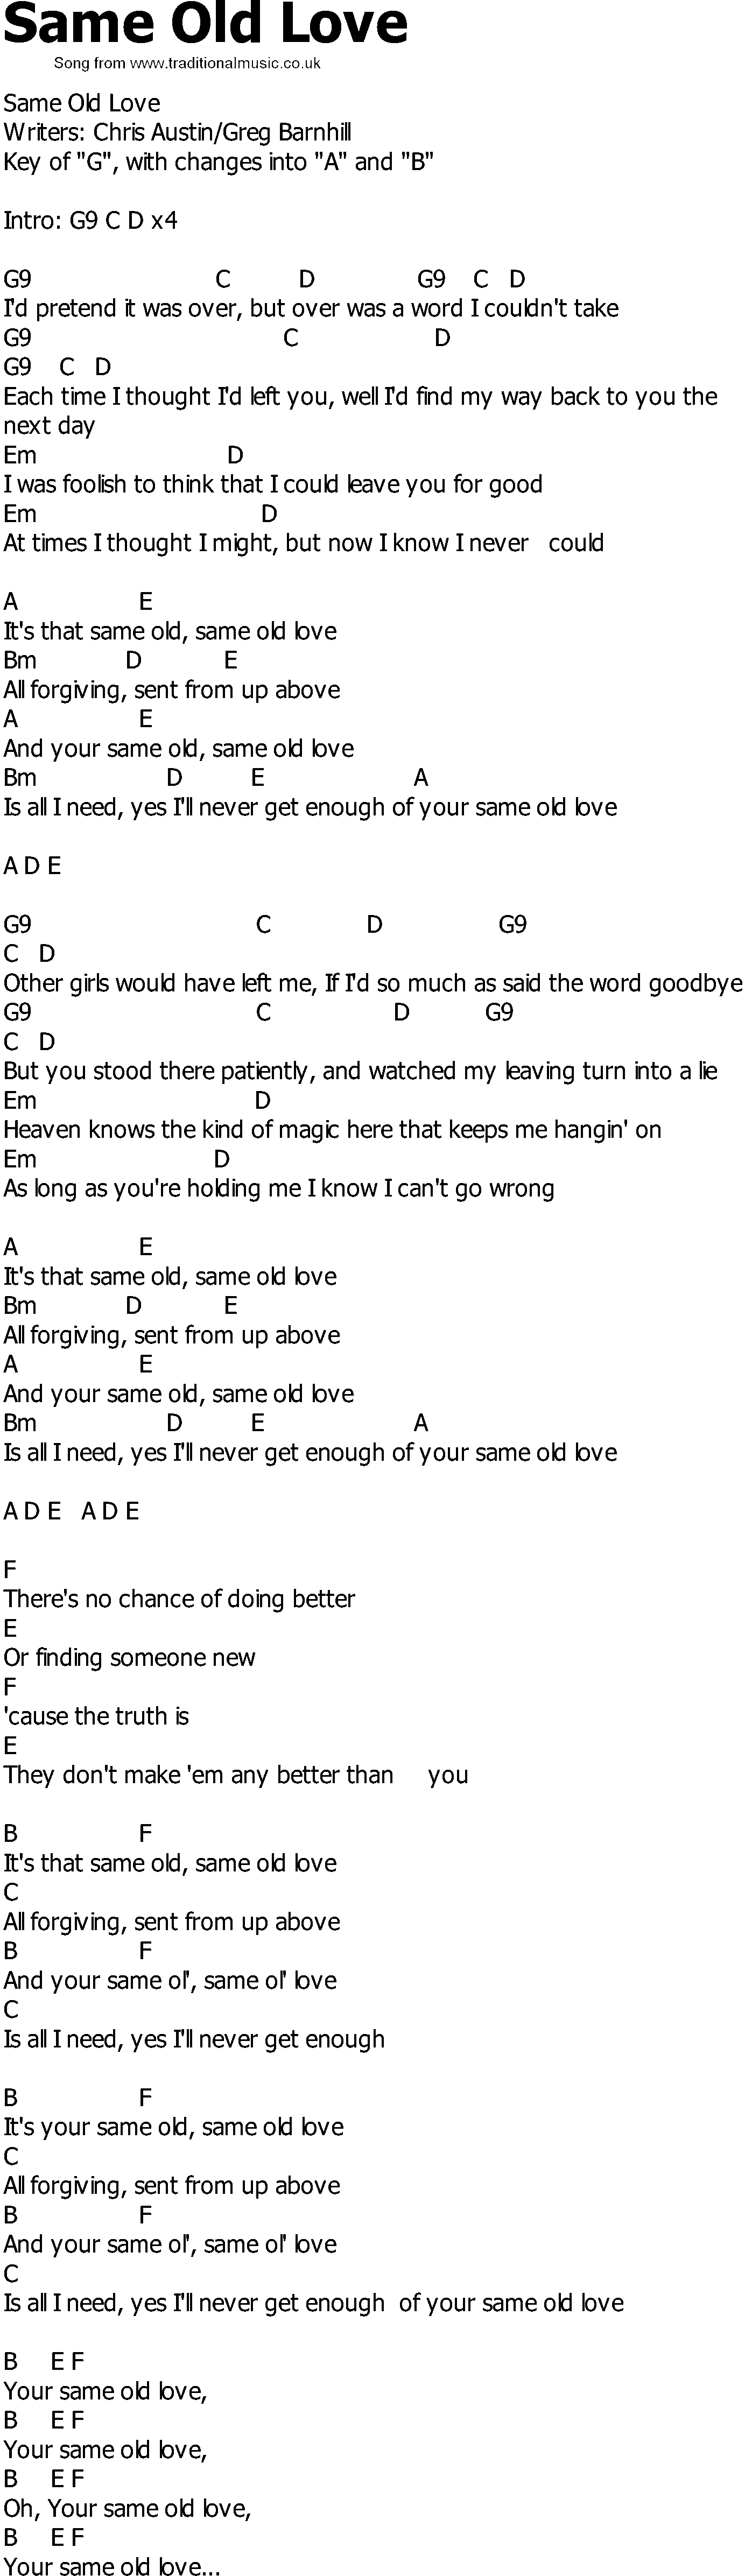 Old Country song lyrics with chords - Same Old Love